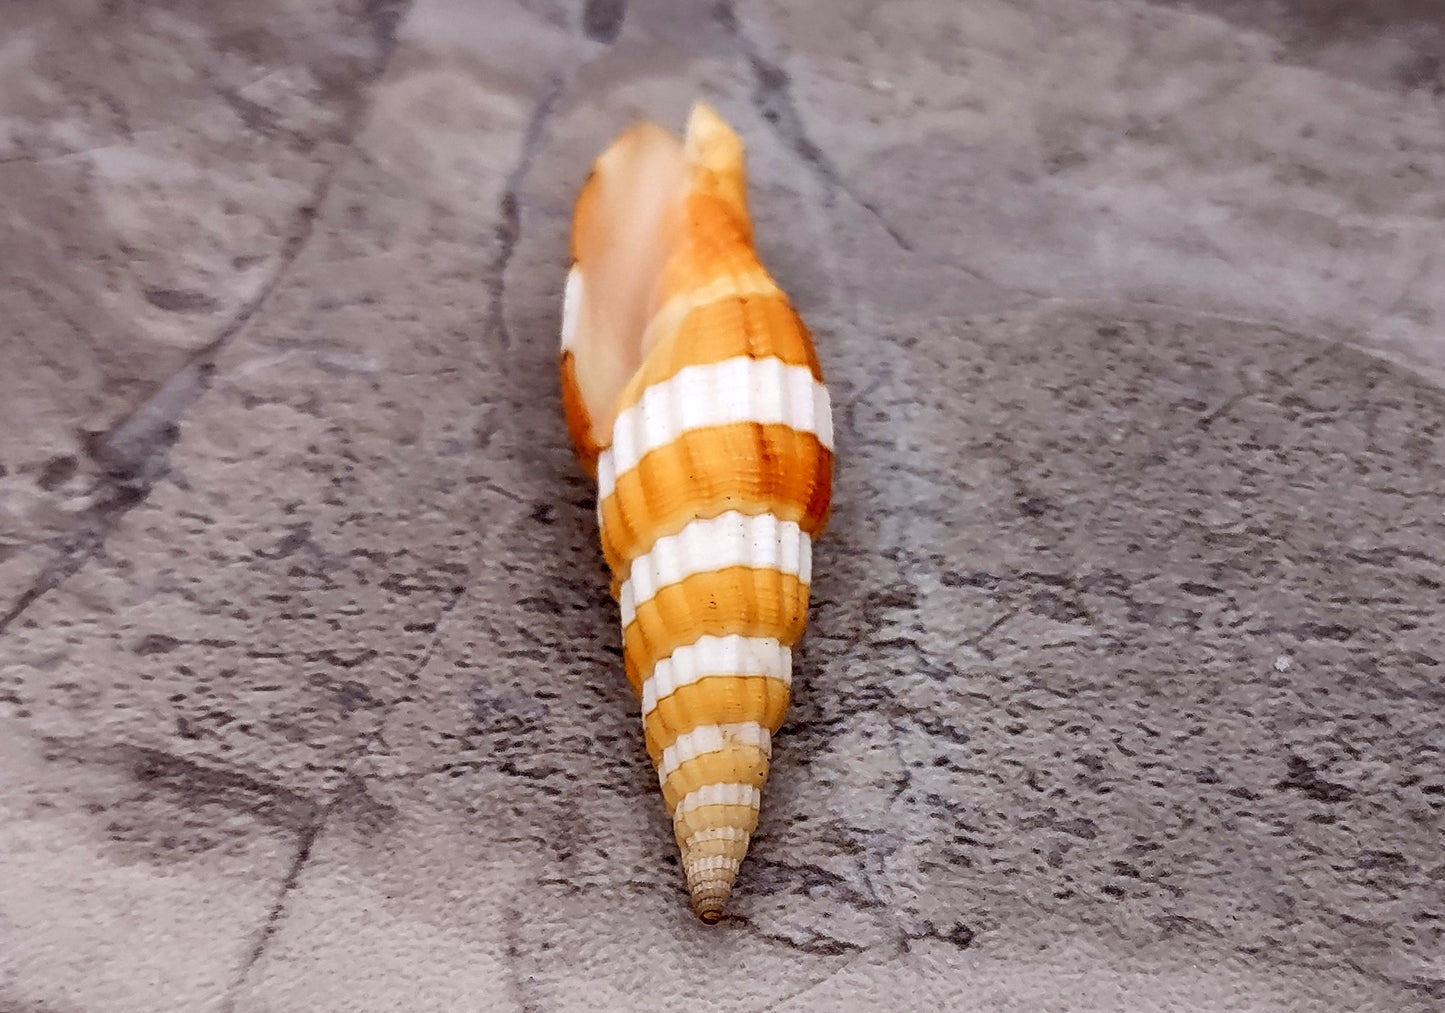 Compressed Miter Seashell Mitra Compressum (1 shell approx. 2+ inches) Perfect shells for coastal crafting and collections!